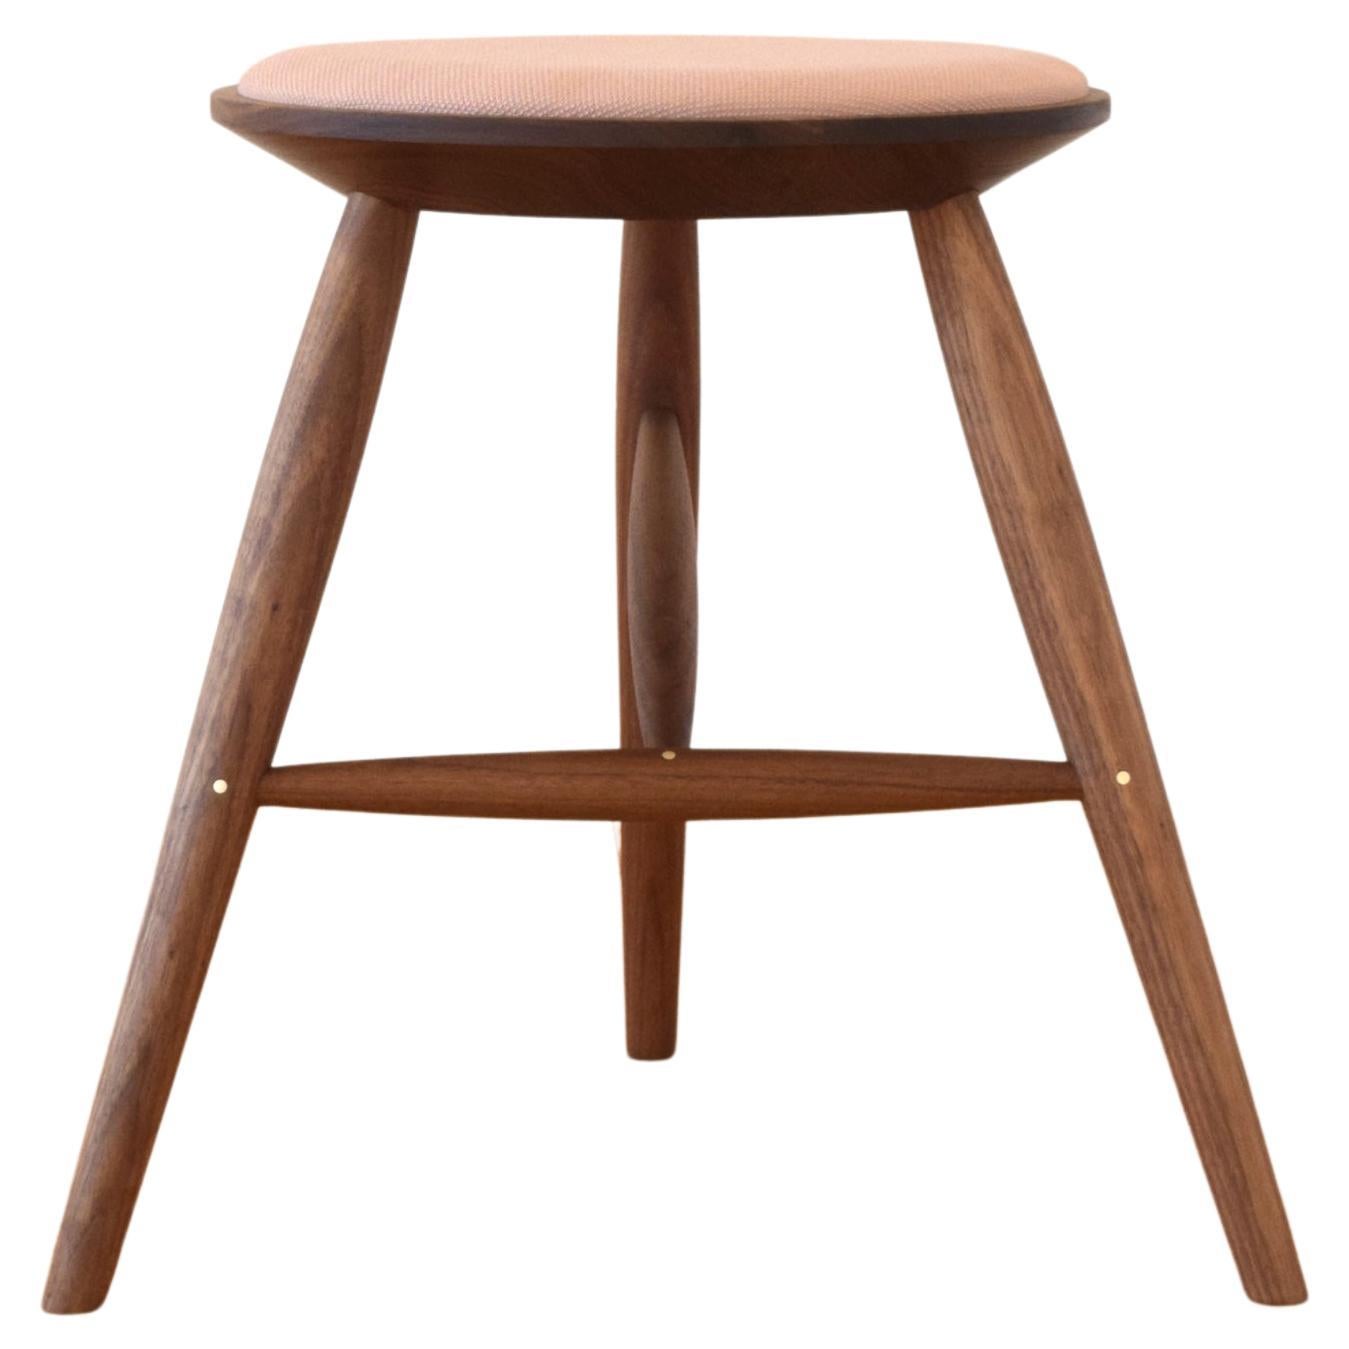 Perch Stools For Sale